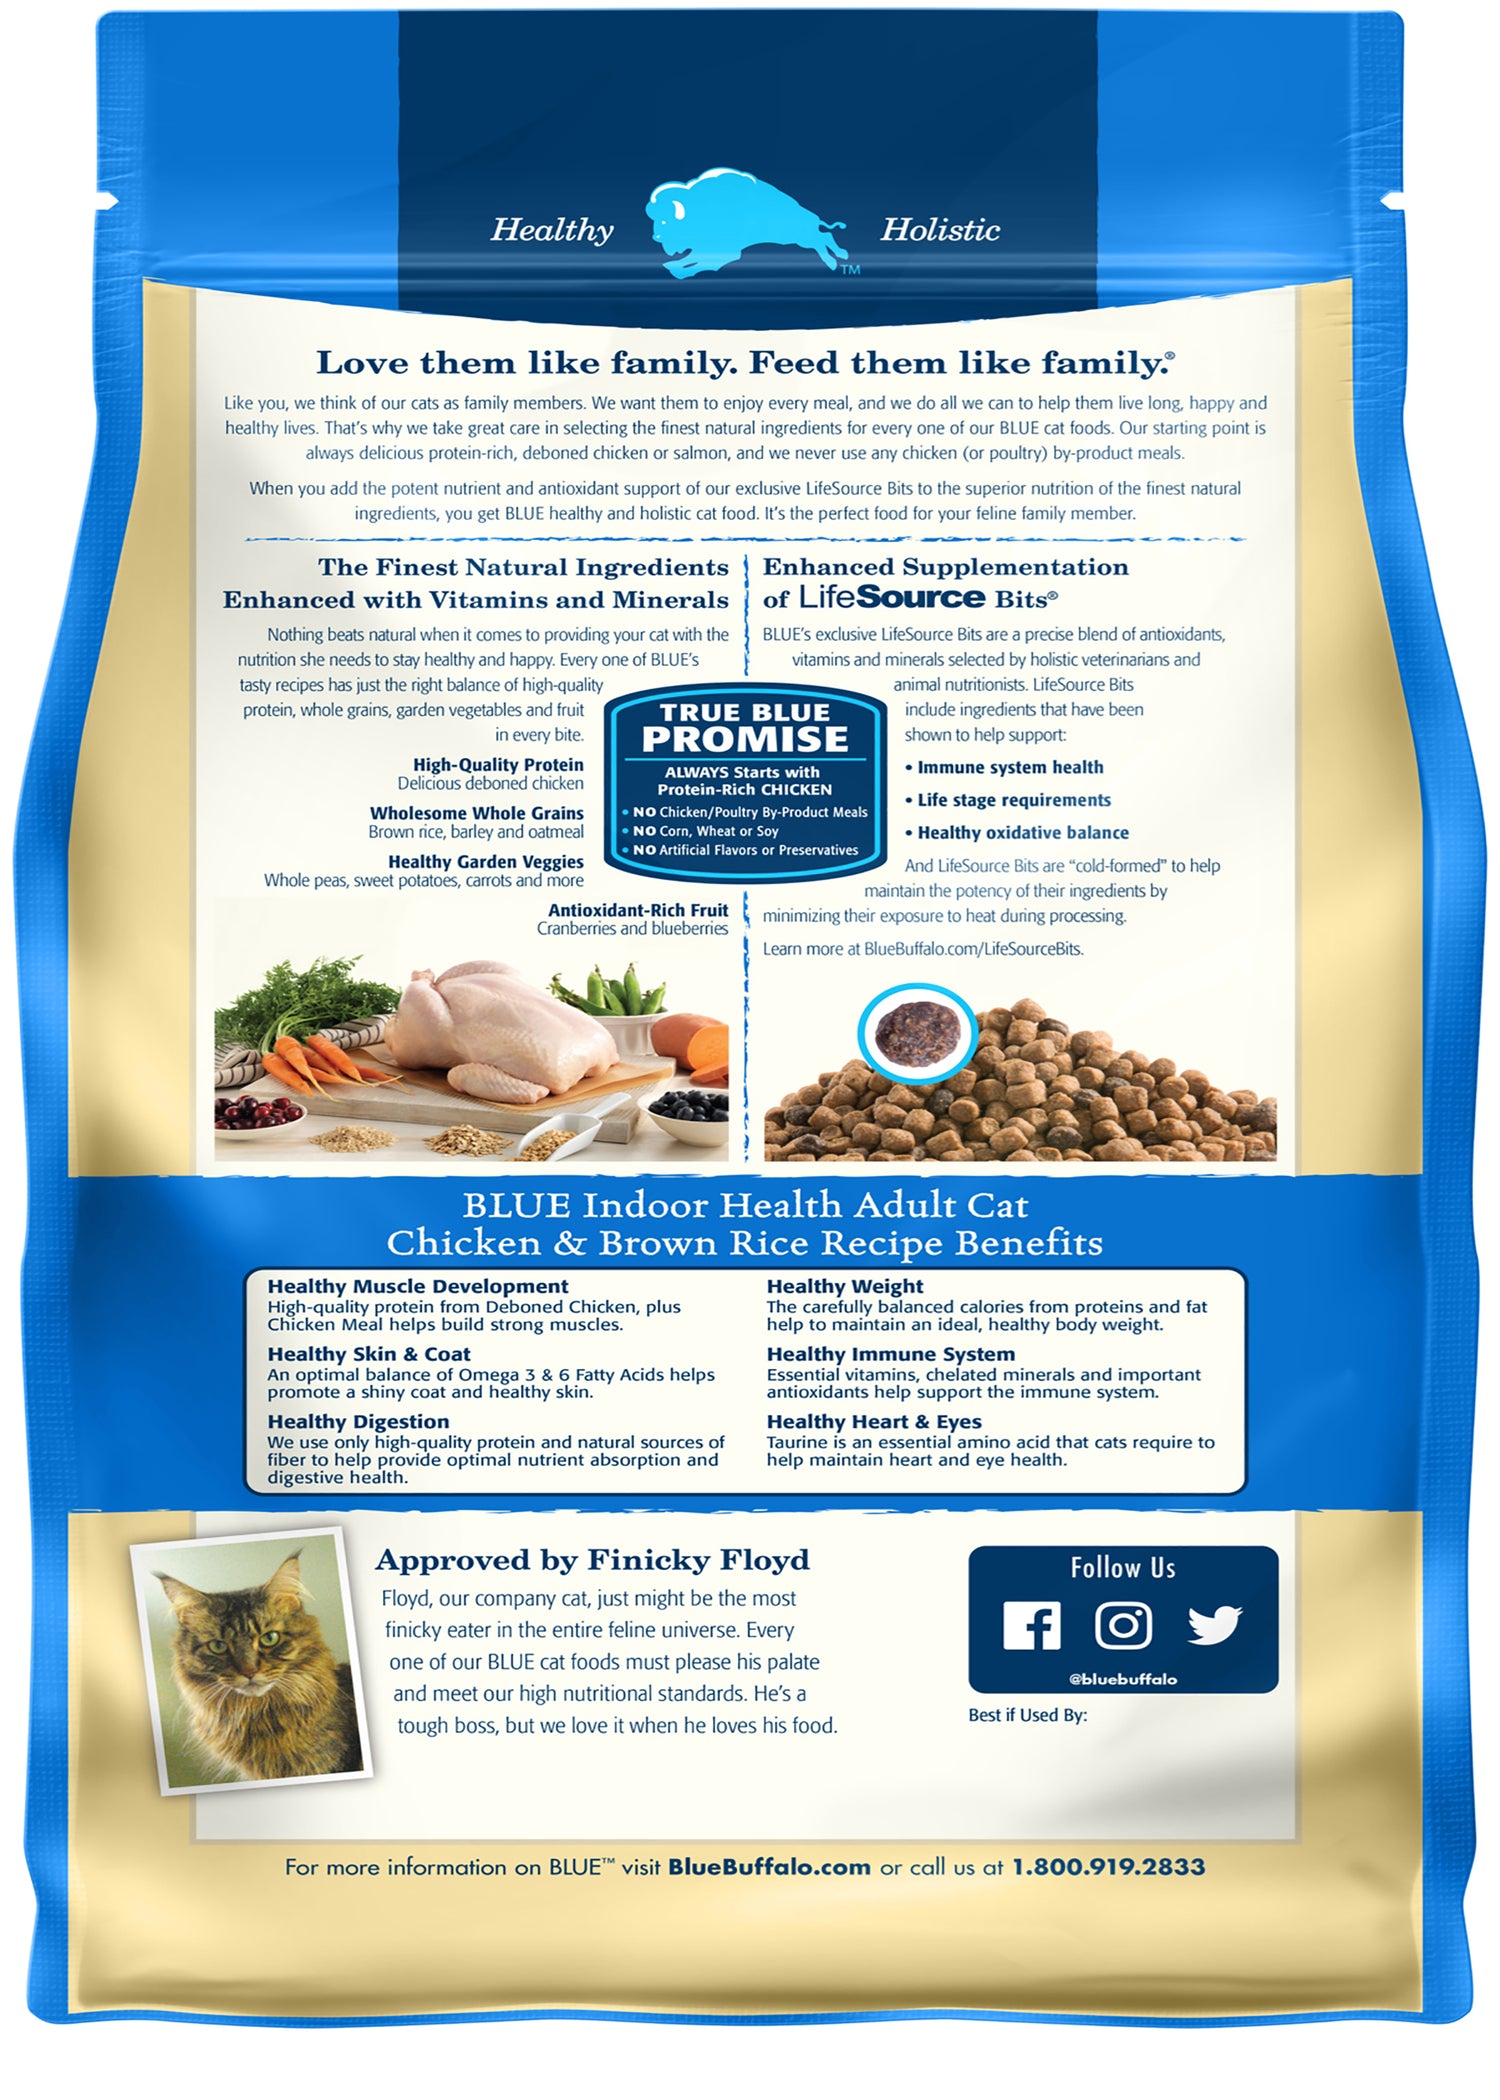 Indoor Health Chicken and Brown Rice Dry Cat Food for Adult Cats, Whole Grain, 5 Lb. Bag